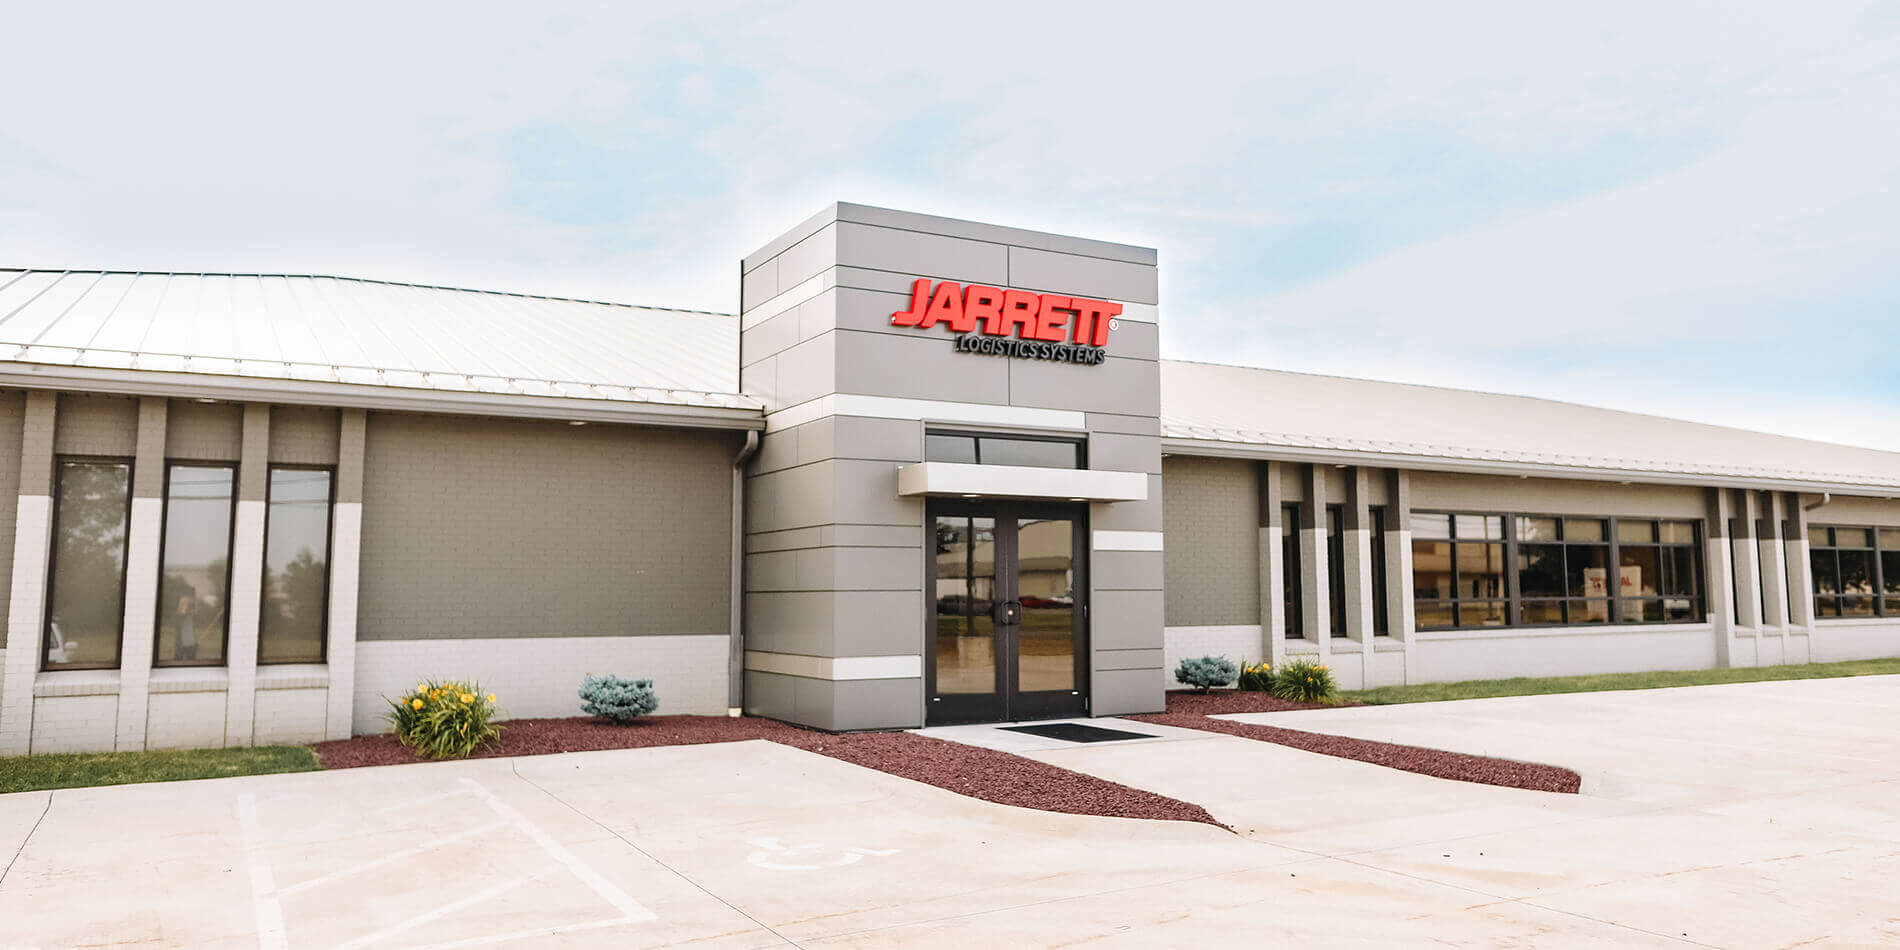 Image of the Jarrett headquarters located in Orrville, OH